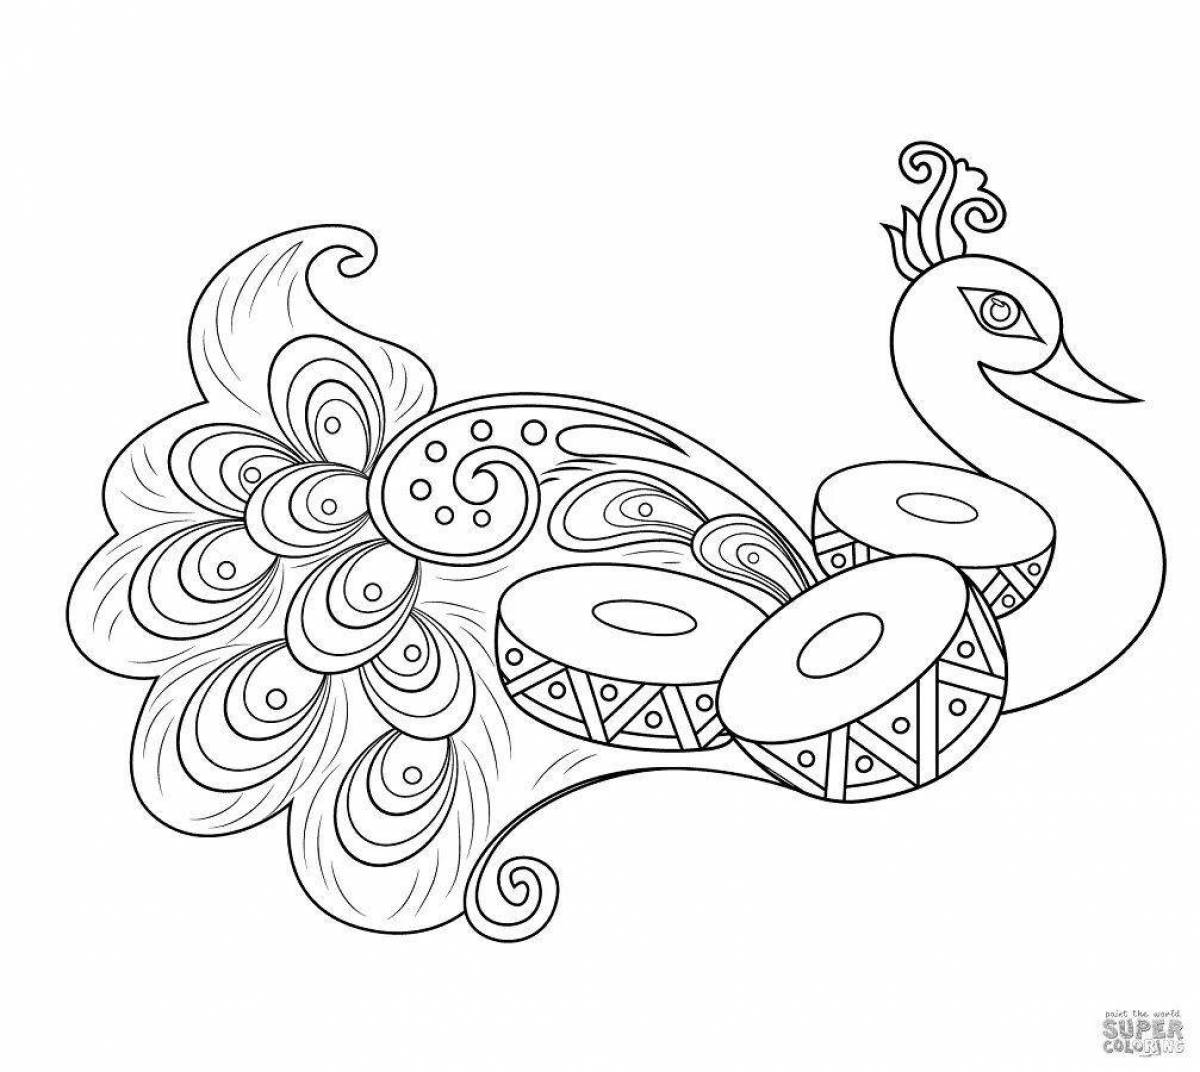 Radiant coloring page fairy bird